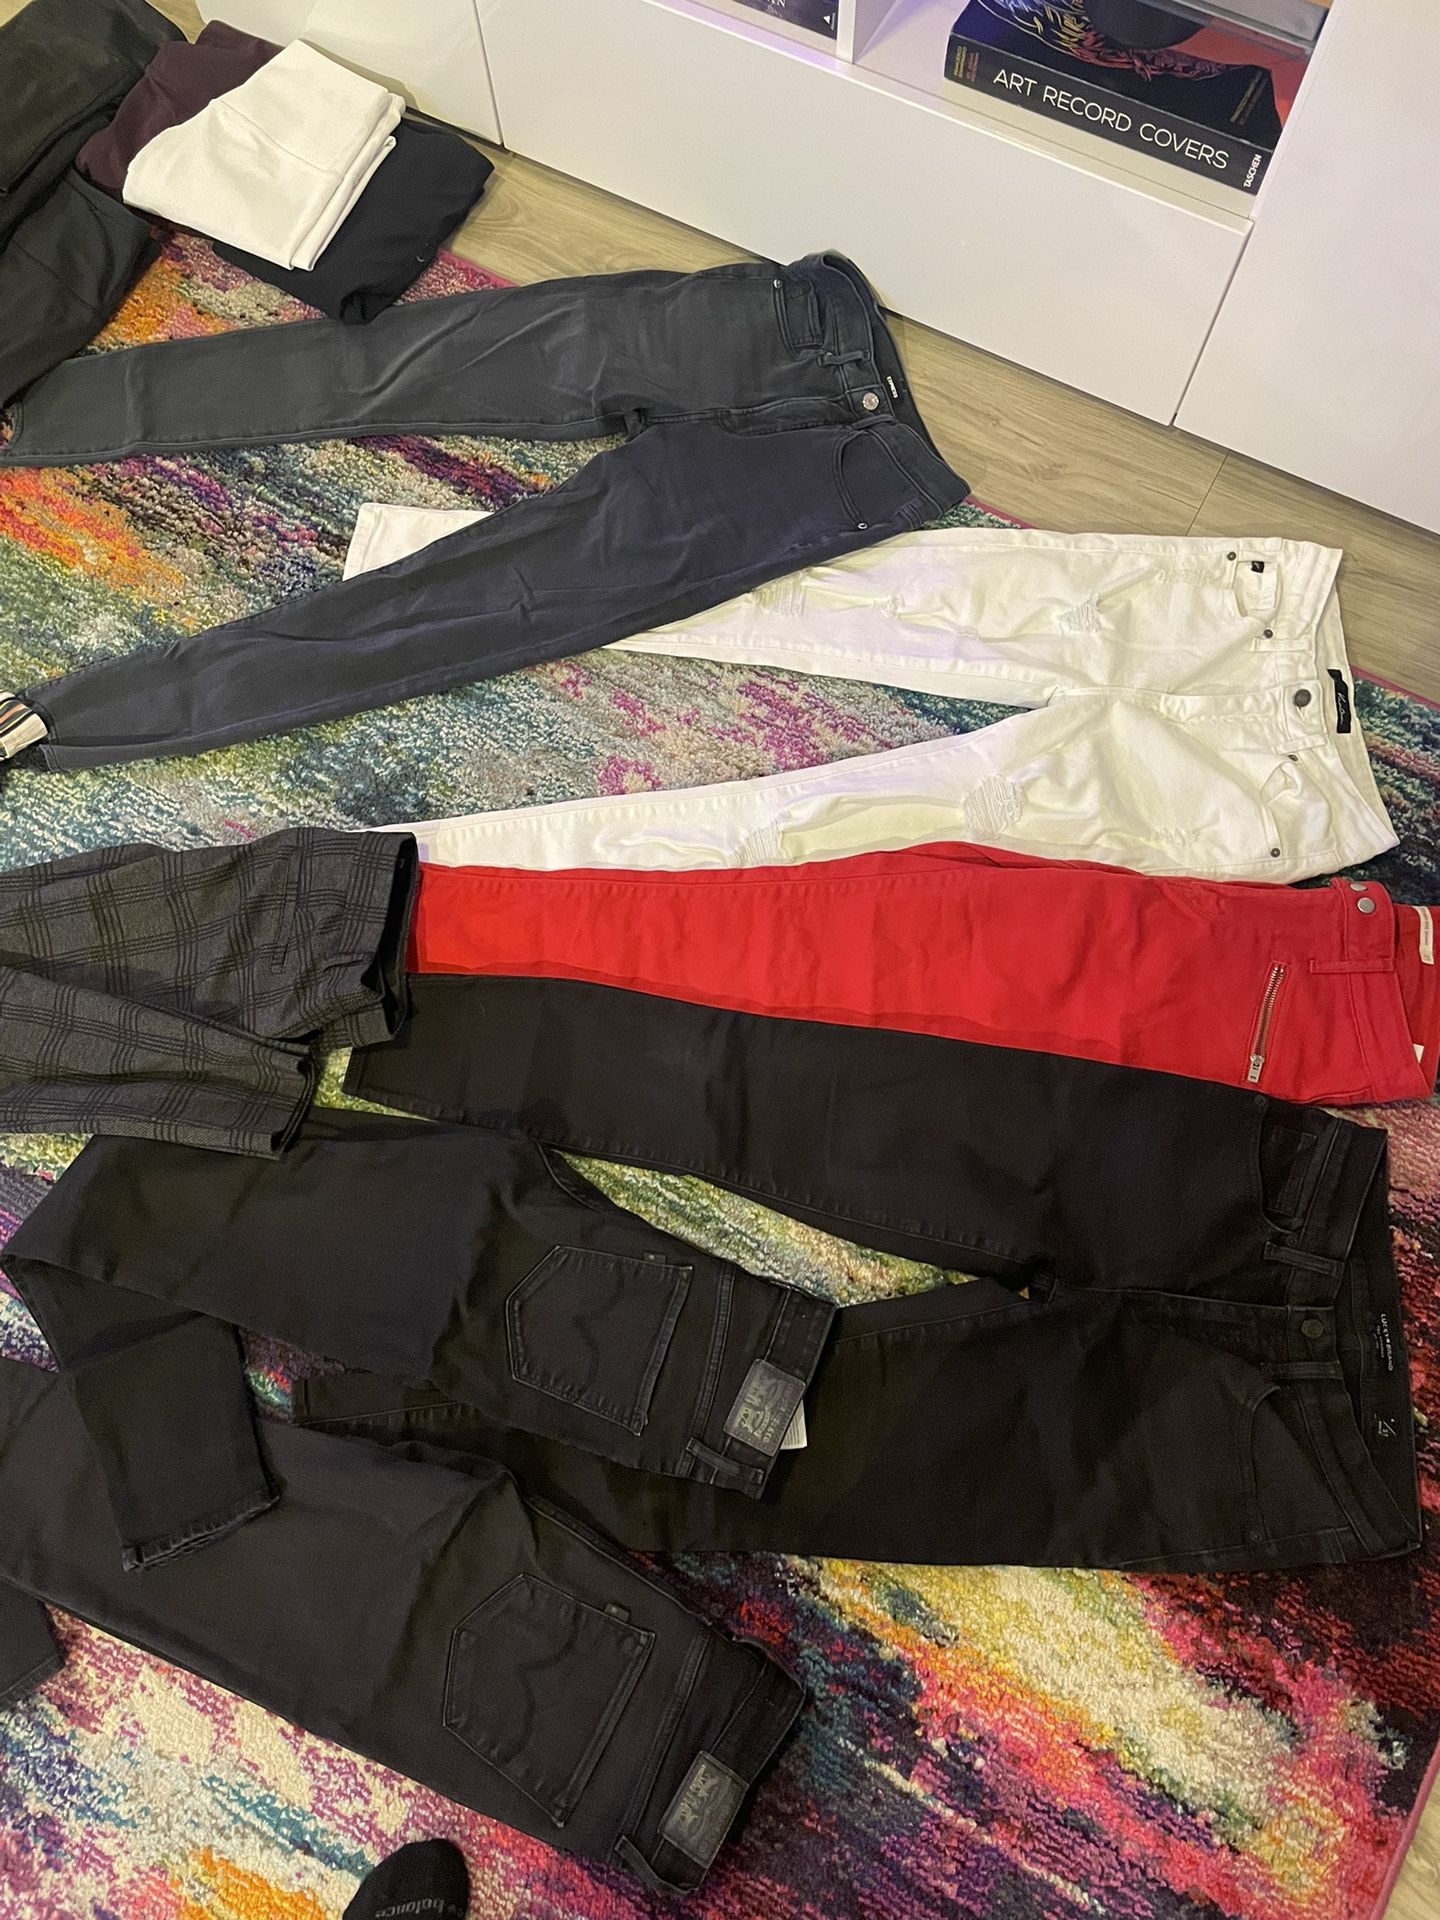 Jeans All Size 27, SM/MD (Lucky, Express, Levi, BCBG) 6 Pairs Of Leggings